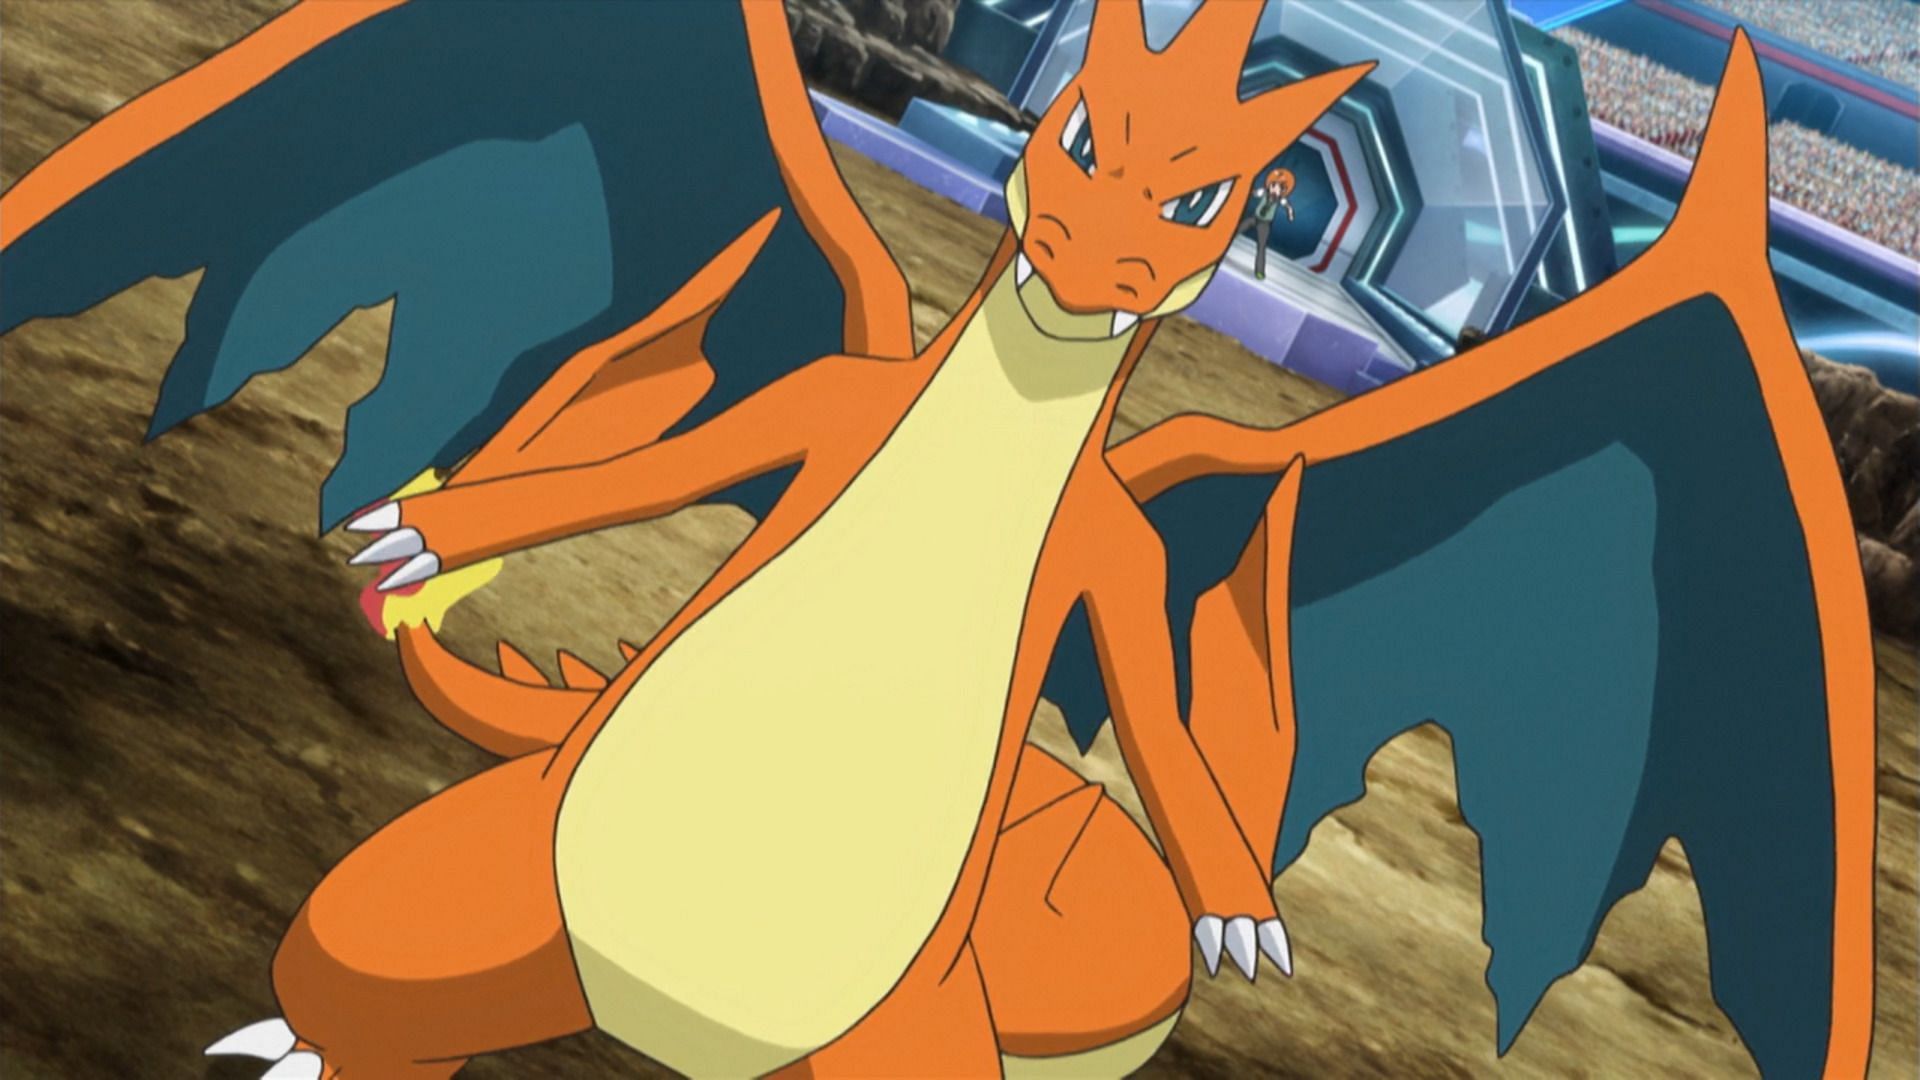 Let me give you @ quick lesson This is me in my reguiar form, just normal  ol Charizard And this is me in my Mega form, Mega Charizard Y And this is